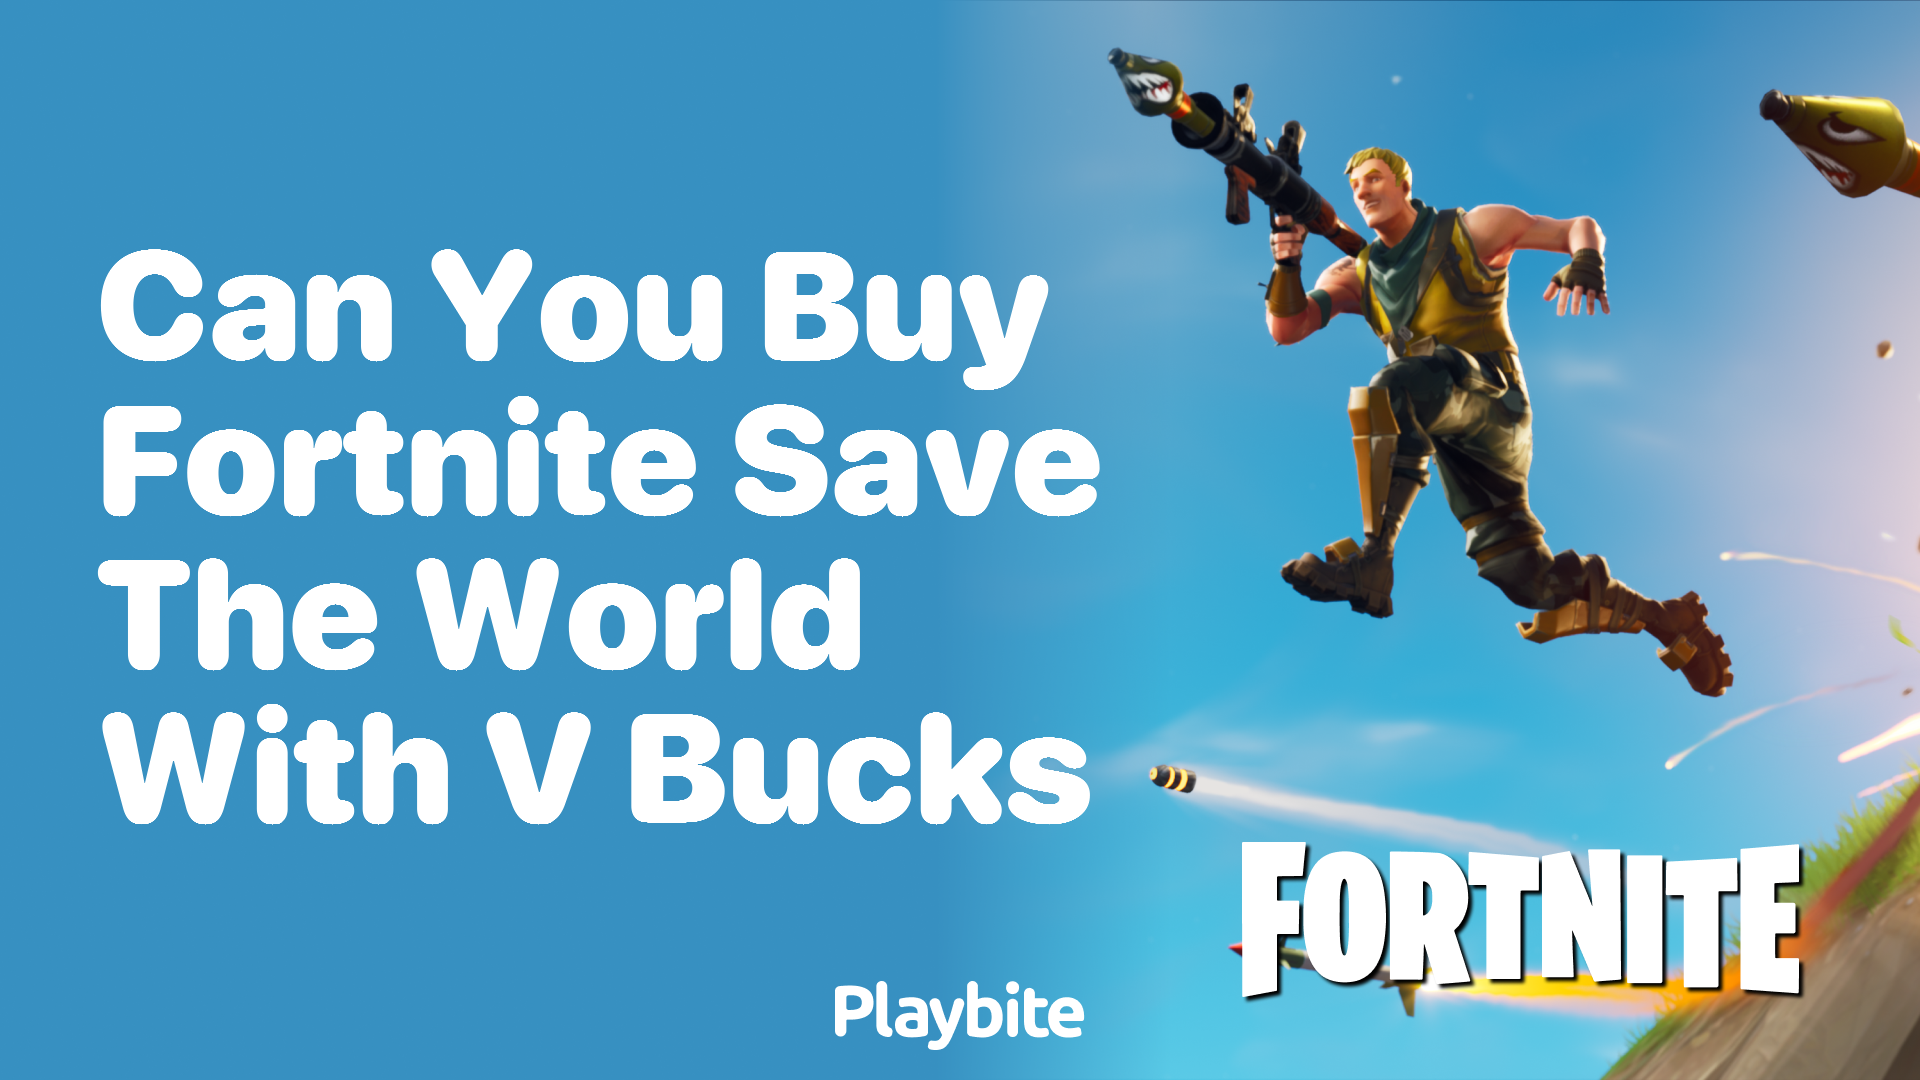 Can You Buy Fortnite Save the World with V-Bucks? - Playbite